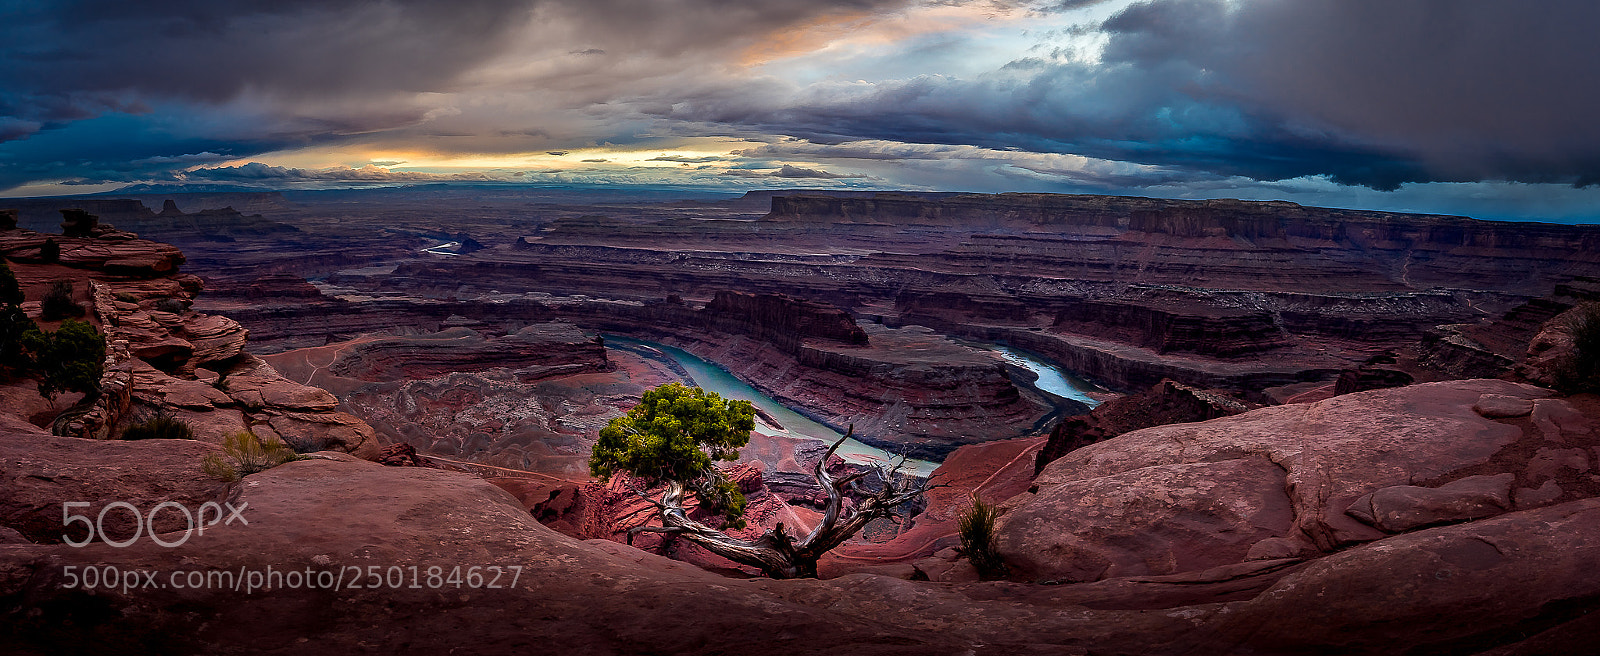 Sony a7R III sample photo. Sunset at deadhorse point photography